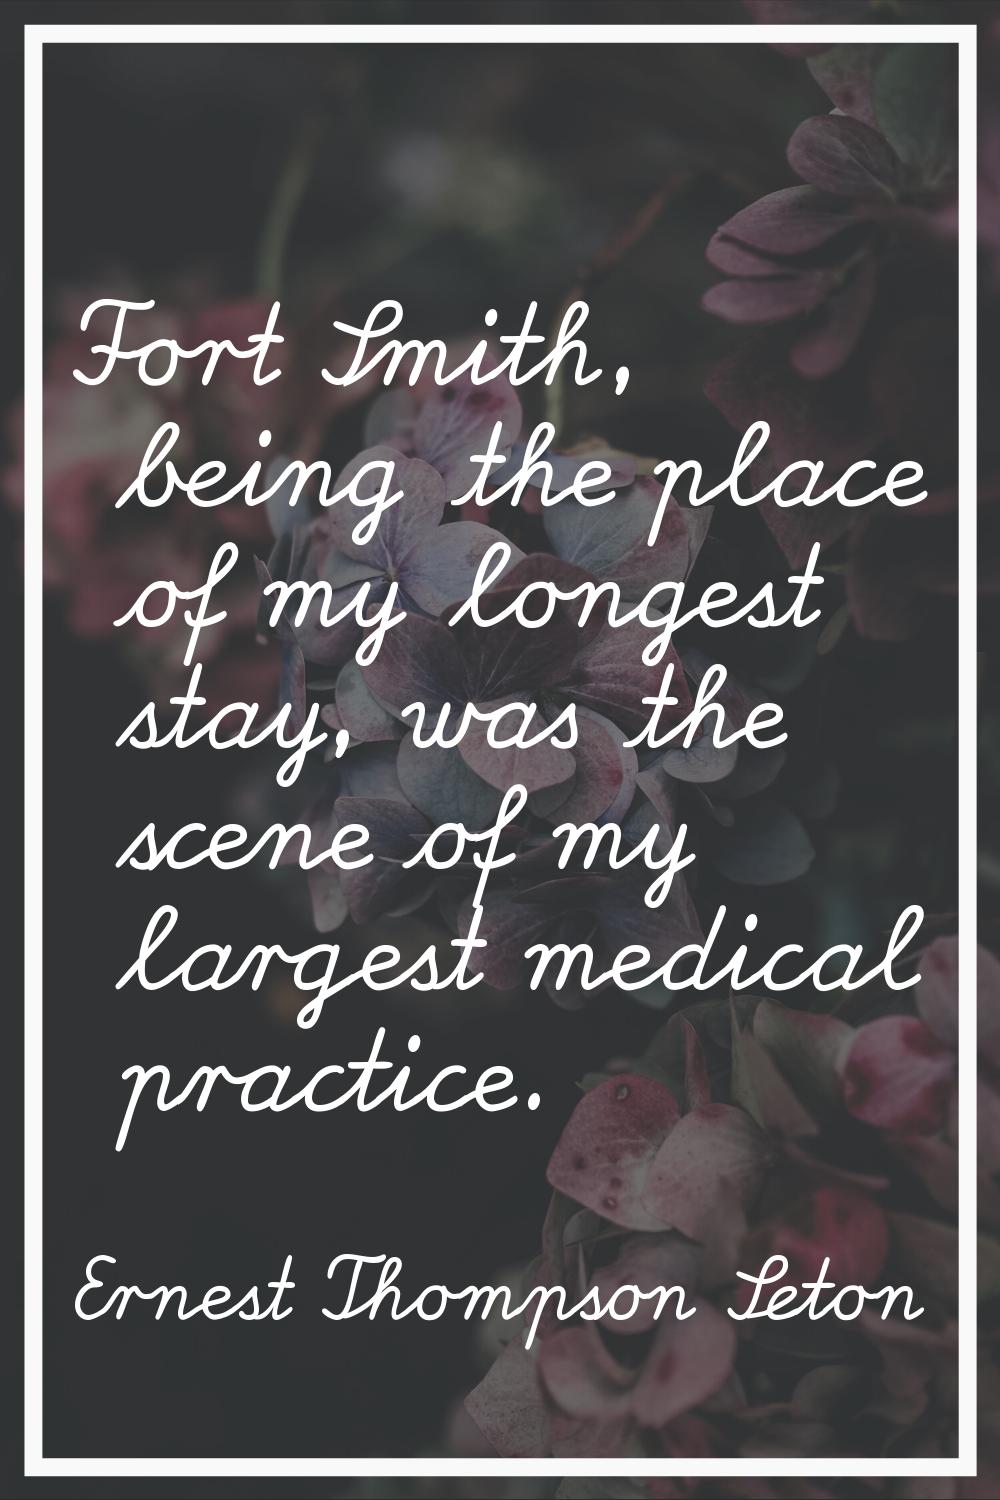 Fort Smith, being the place of my longest stay, was the scene of my largest medical practice.